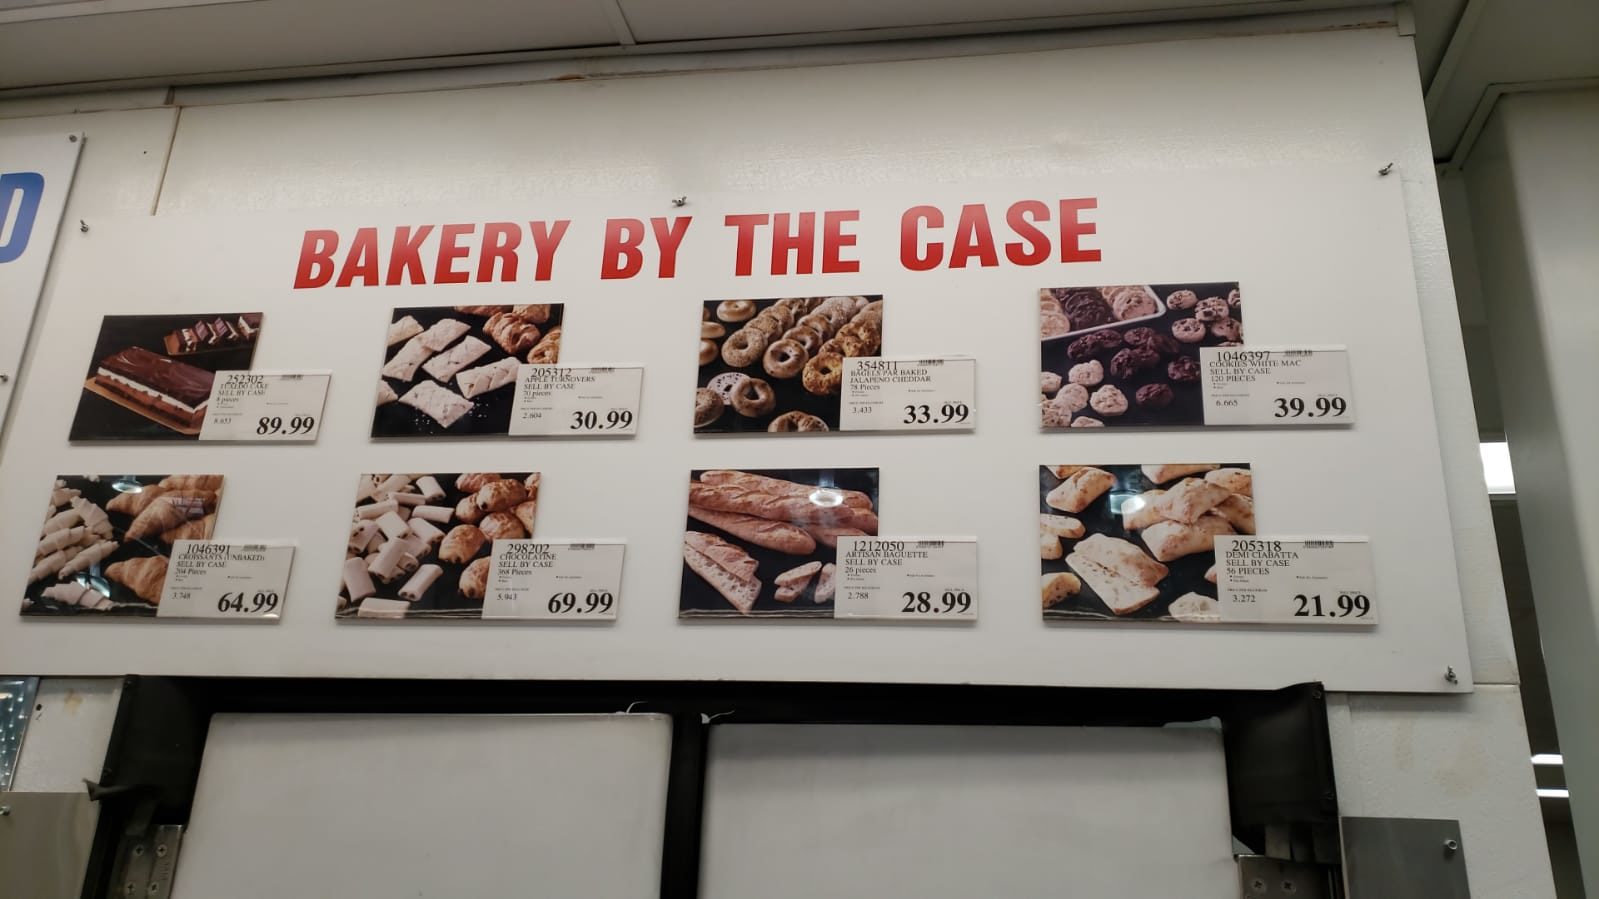 Costco Canada Unbaked Baked Goods